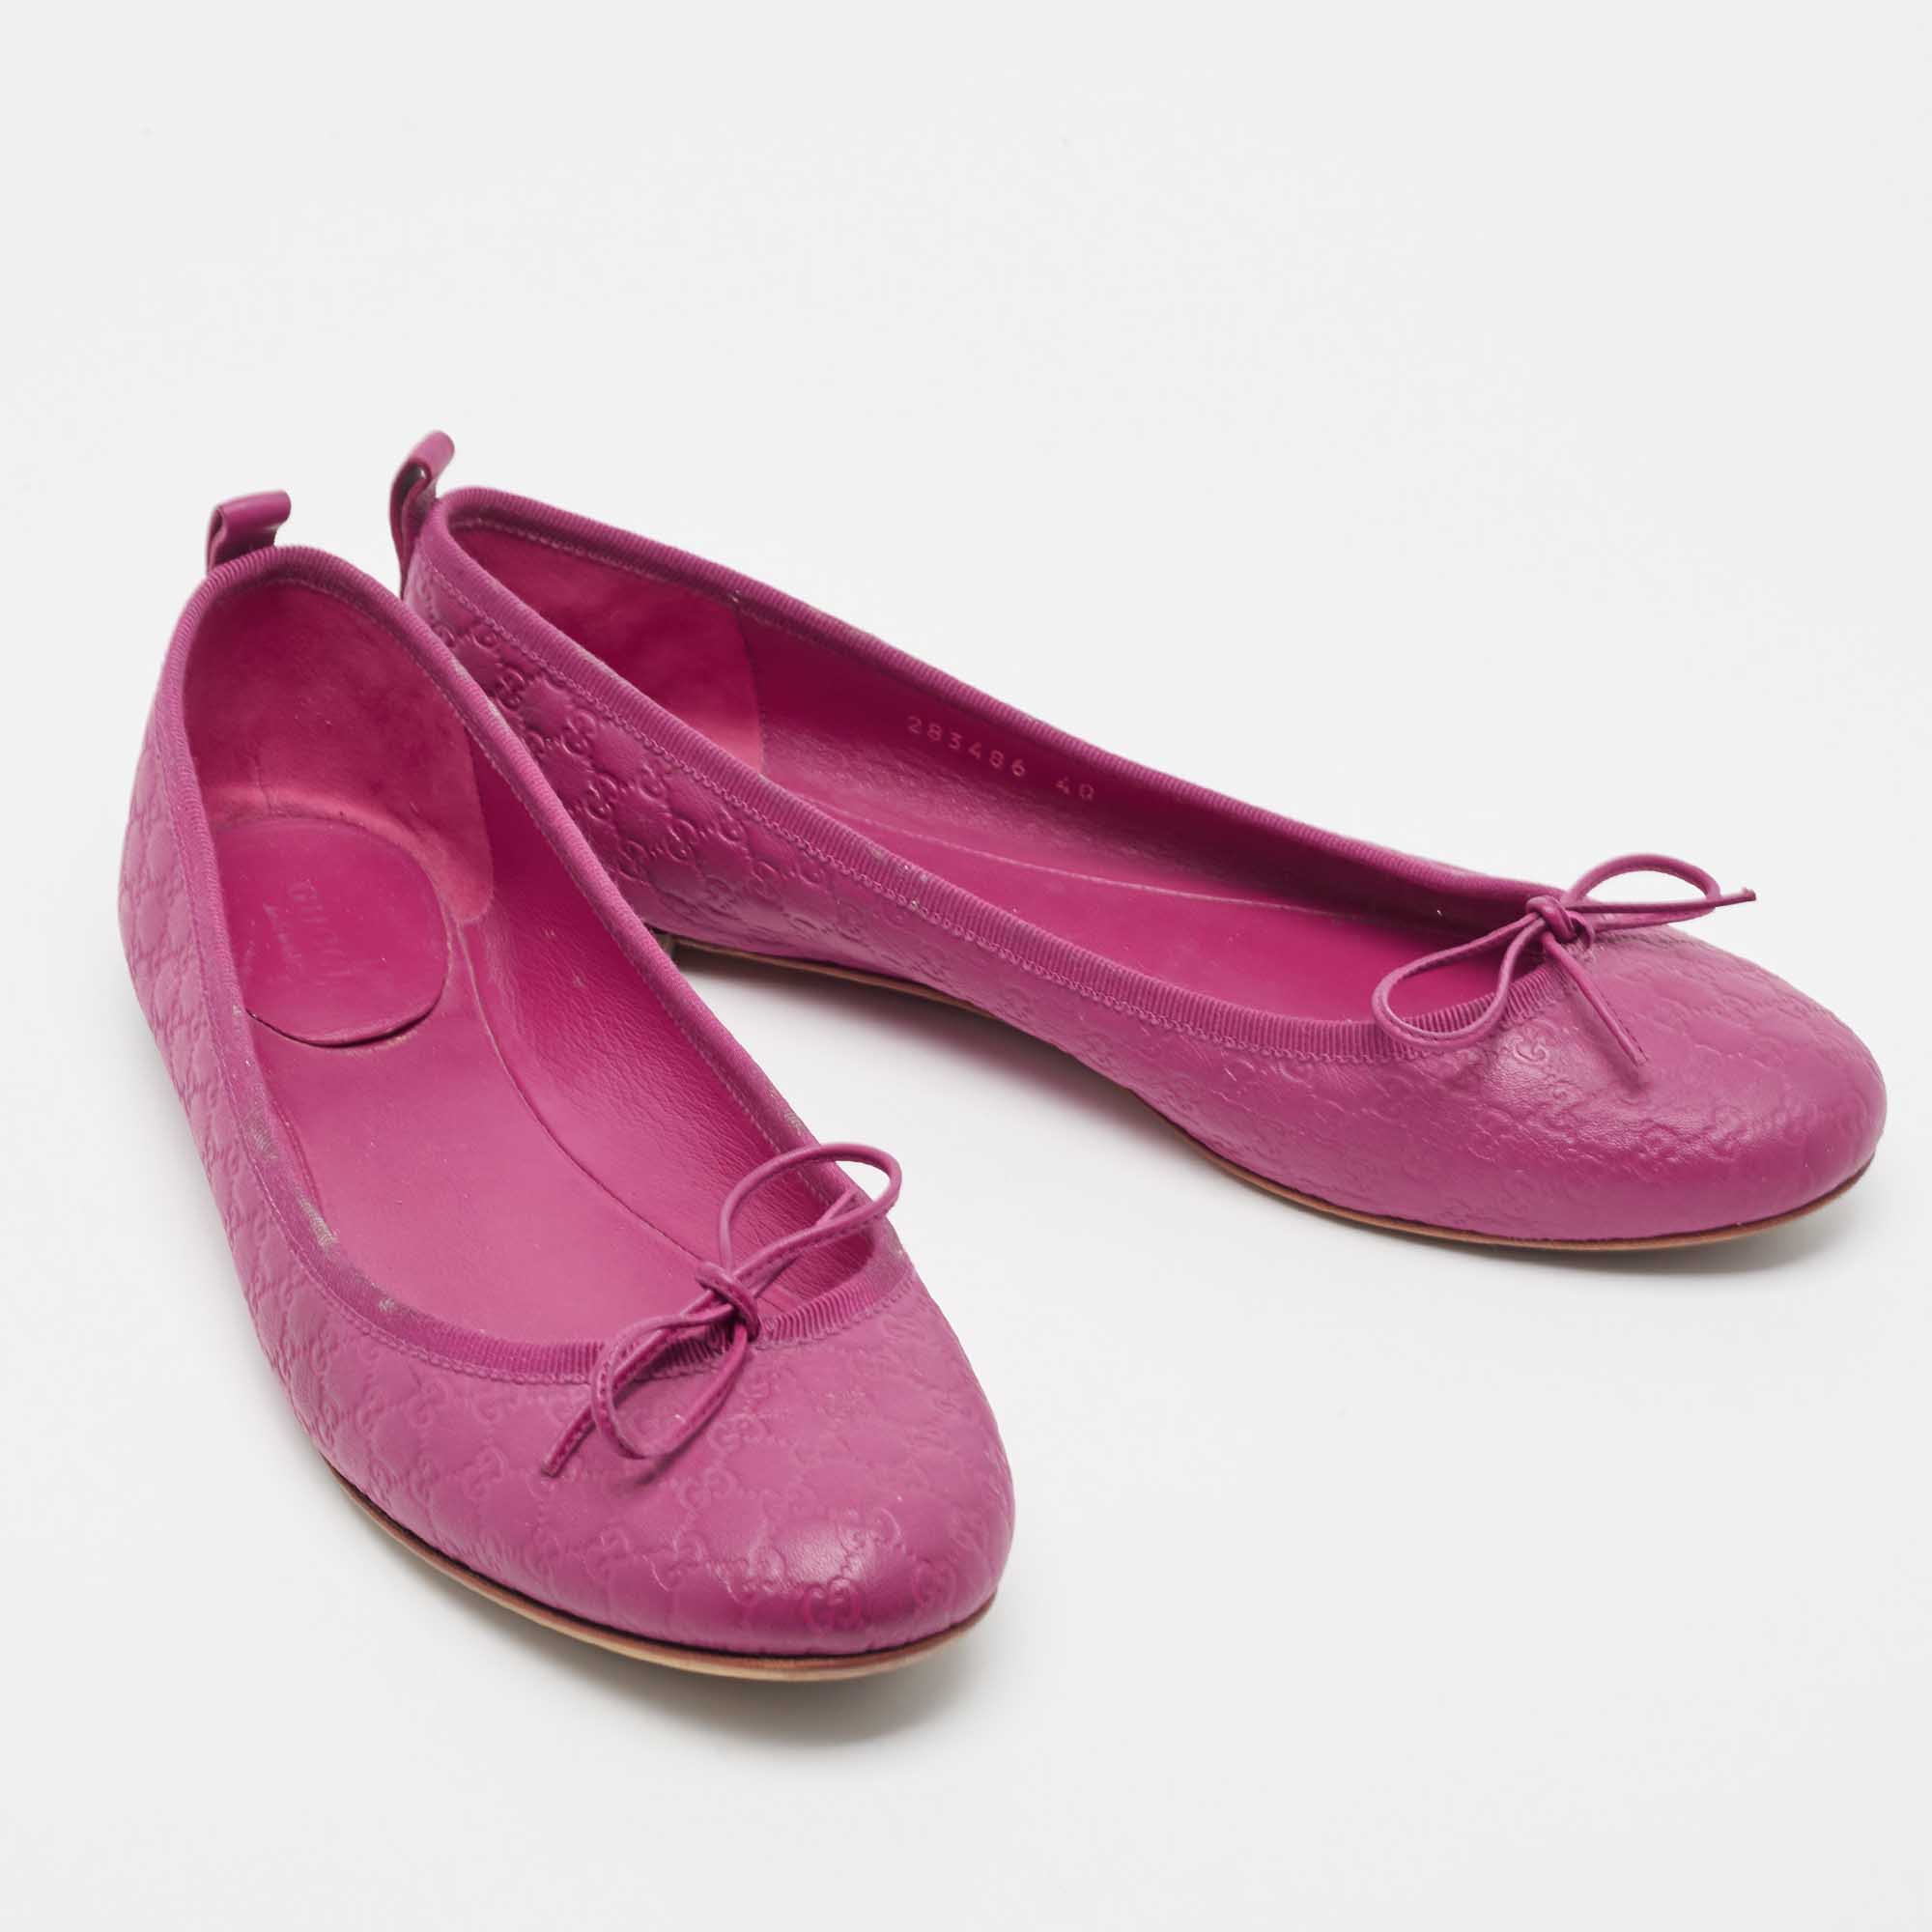 Gucci Purple Leather Microguccissima Bow Detail Ballet Flats Size 40